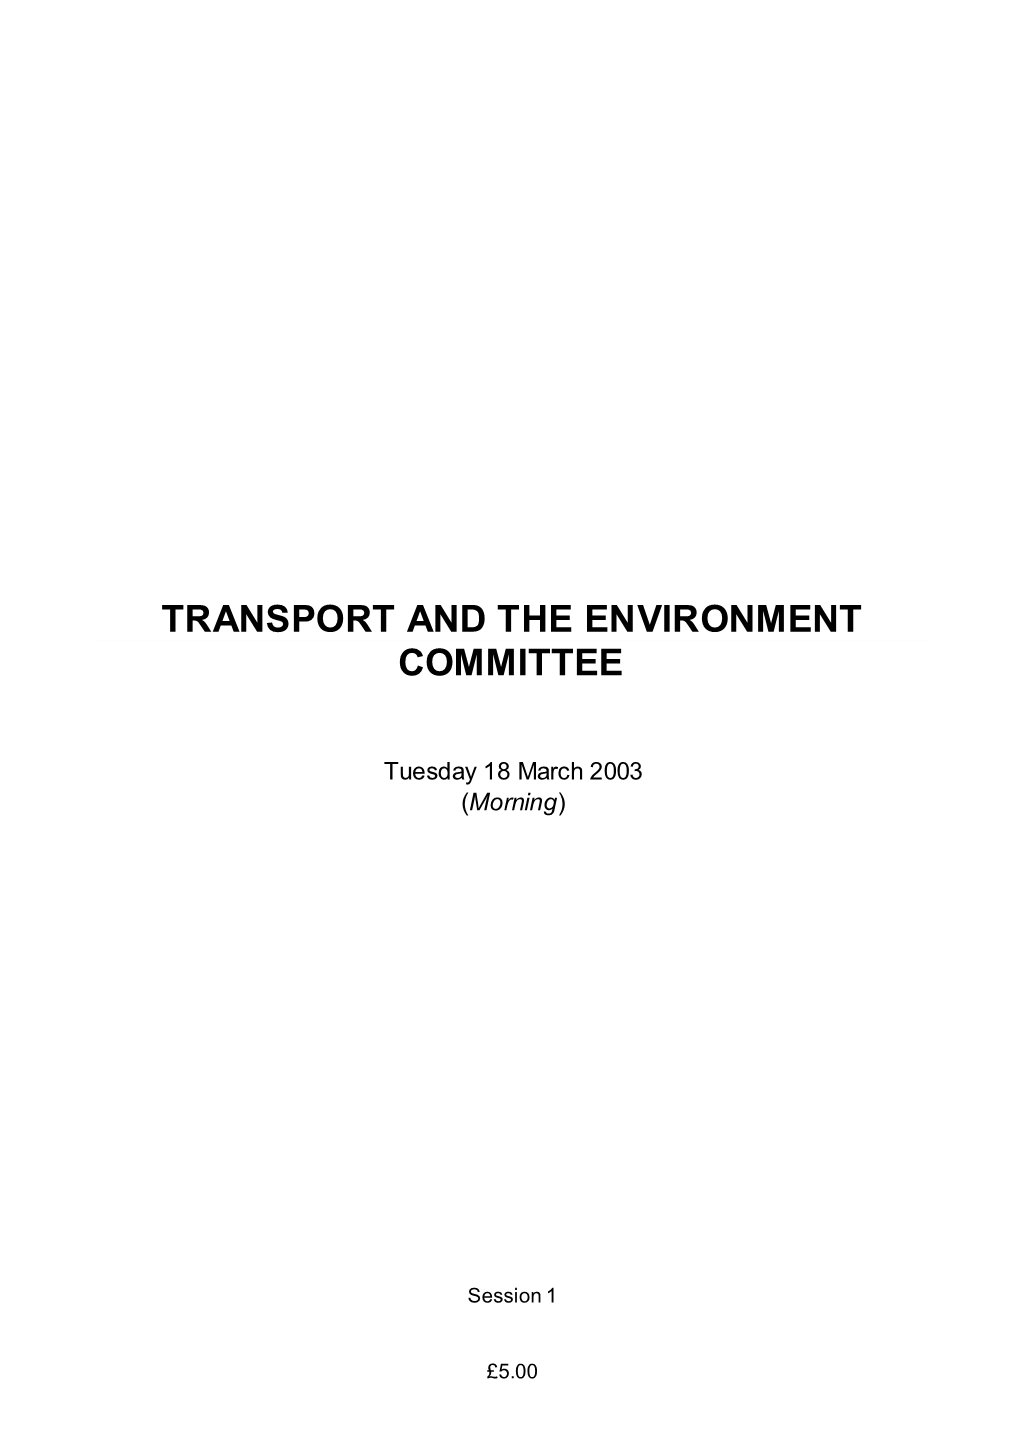 Transport and the Environment Committee